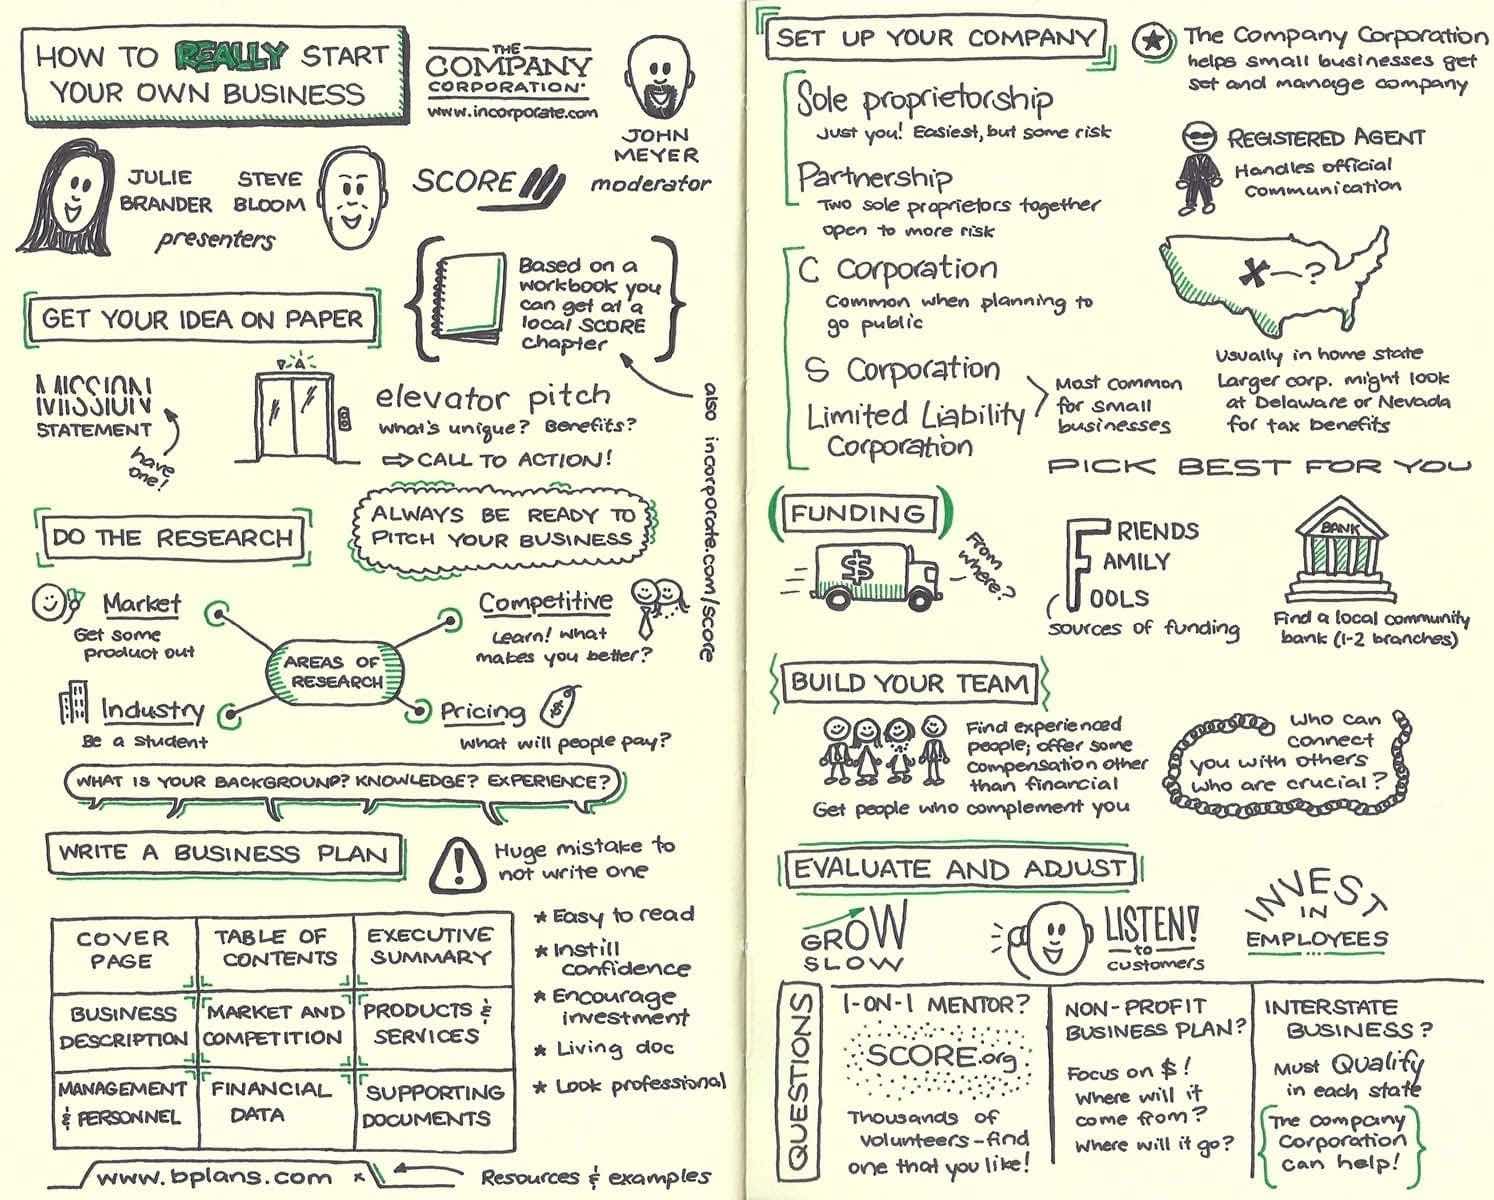 Sketchnotes for webinar by Incorporate.com and SCORE